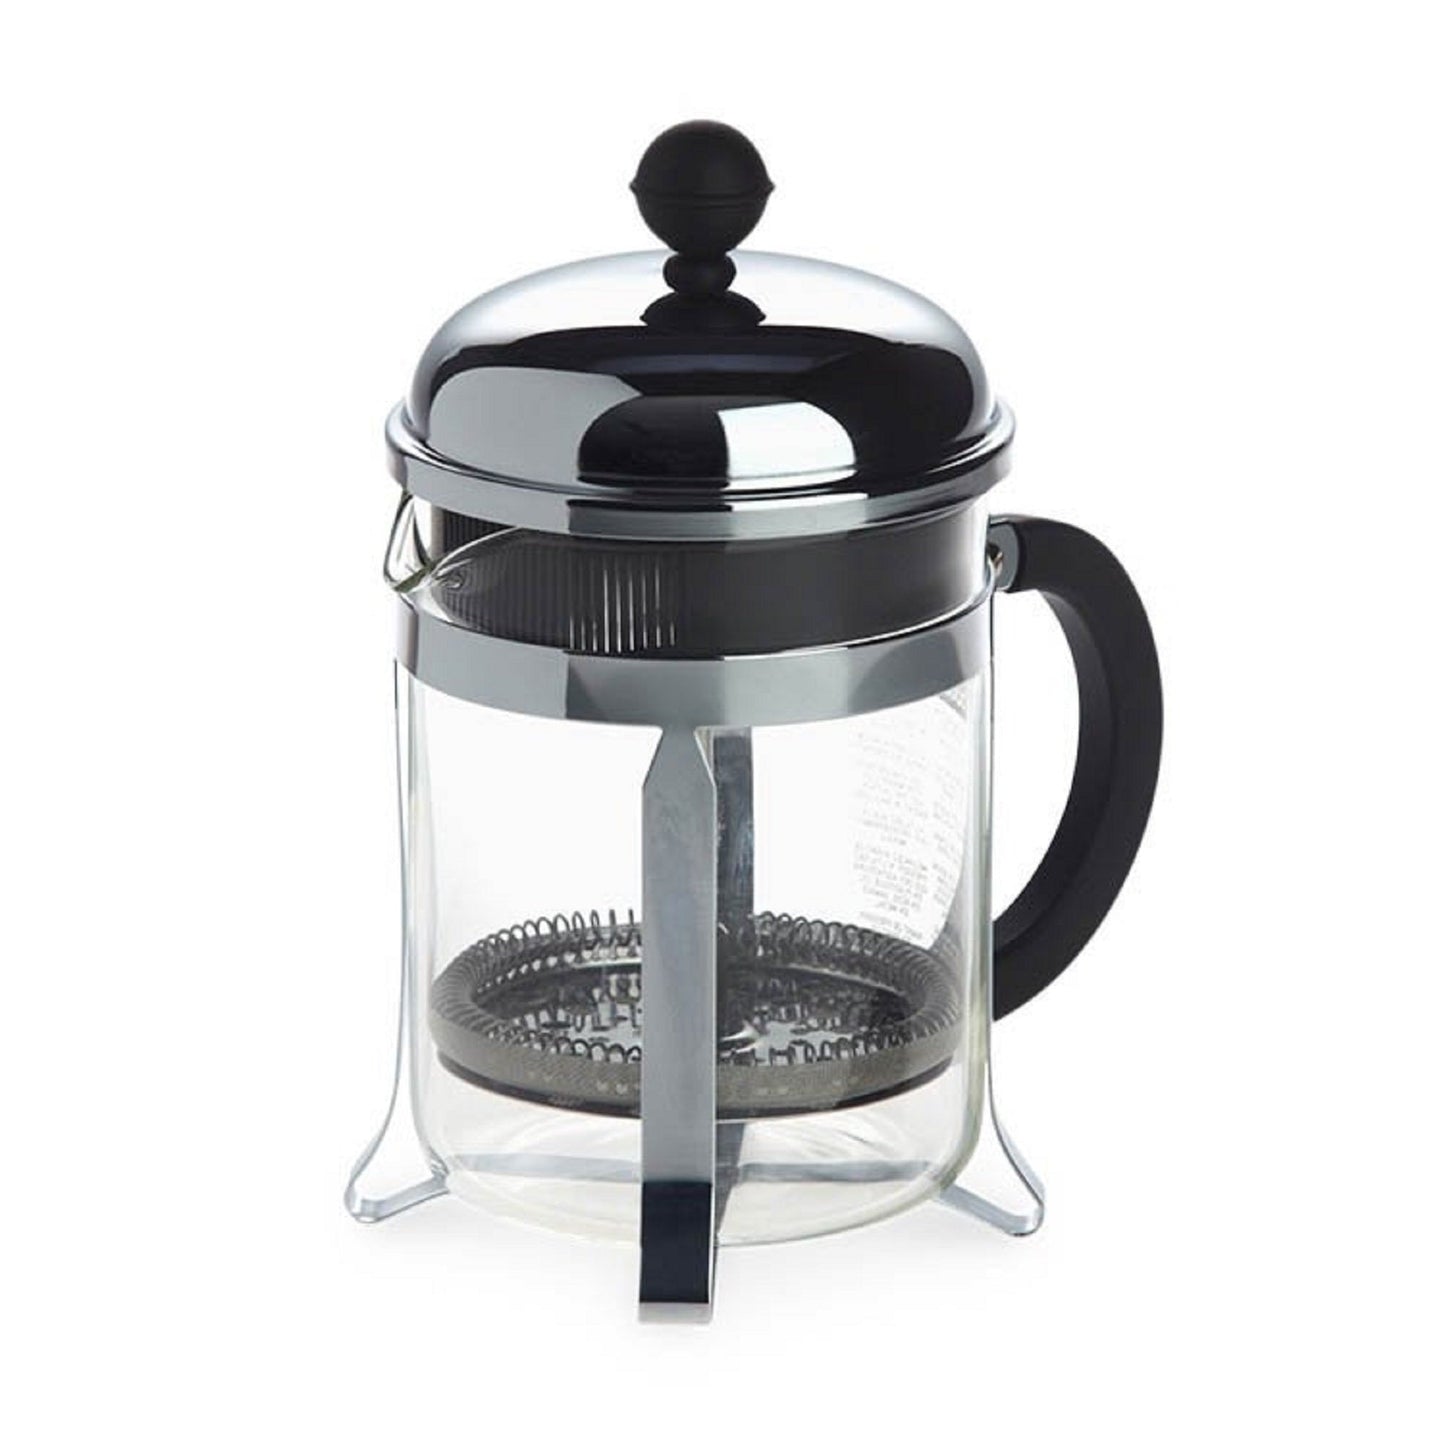 Bodum - Chambord French Press 4 Cup 500ml  Glass Body with 4 Stainless steel Strips running Vertiacl up the French Press Body , Black Plastic Handle and Stainlesssteel Lid with Smll Black ball on top with Metal plunger - Velo Coffee Roasters